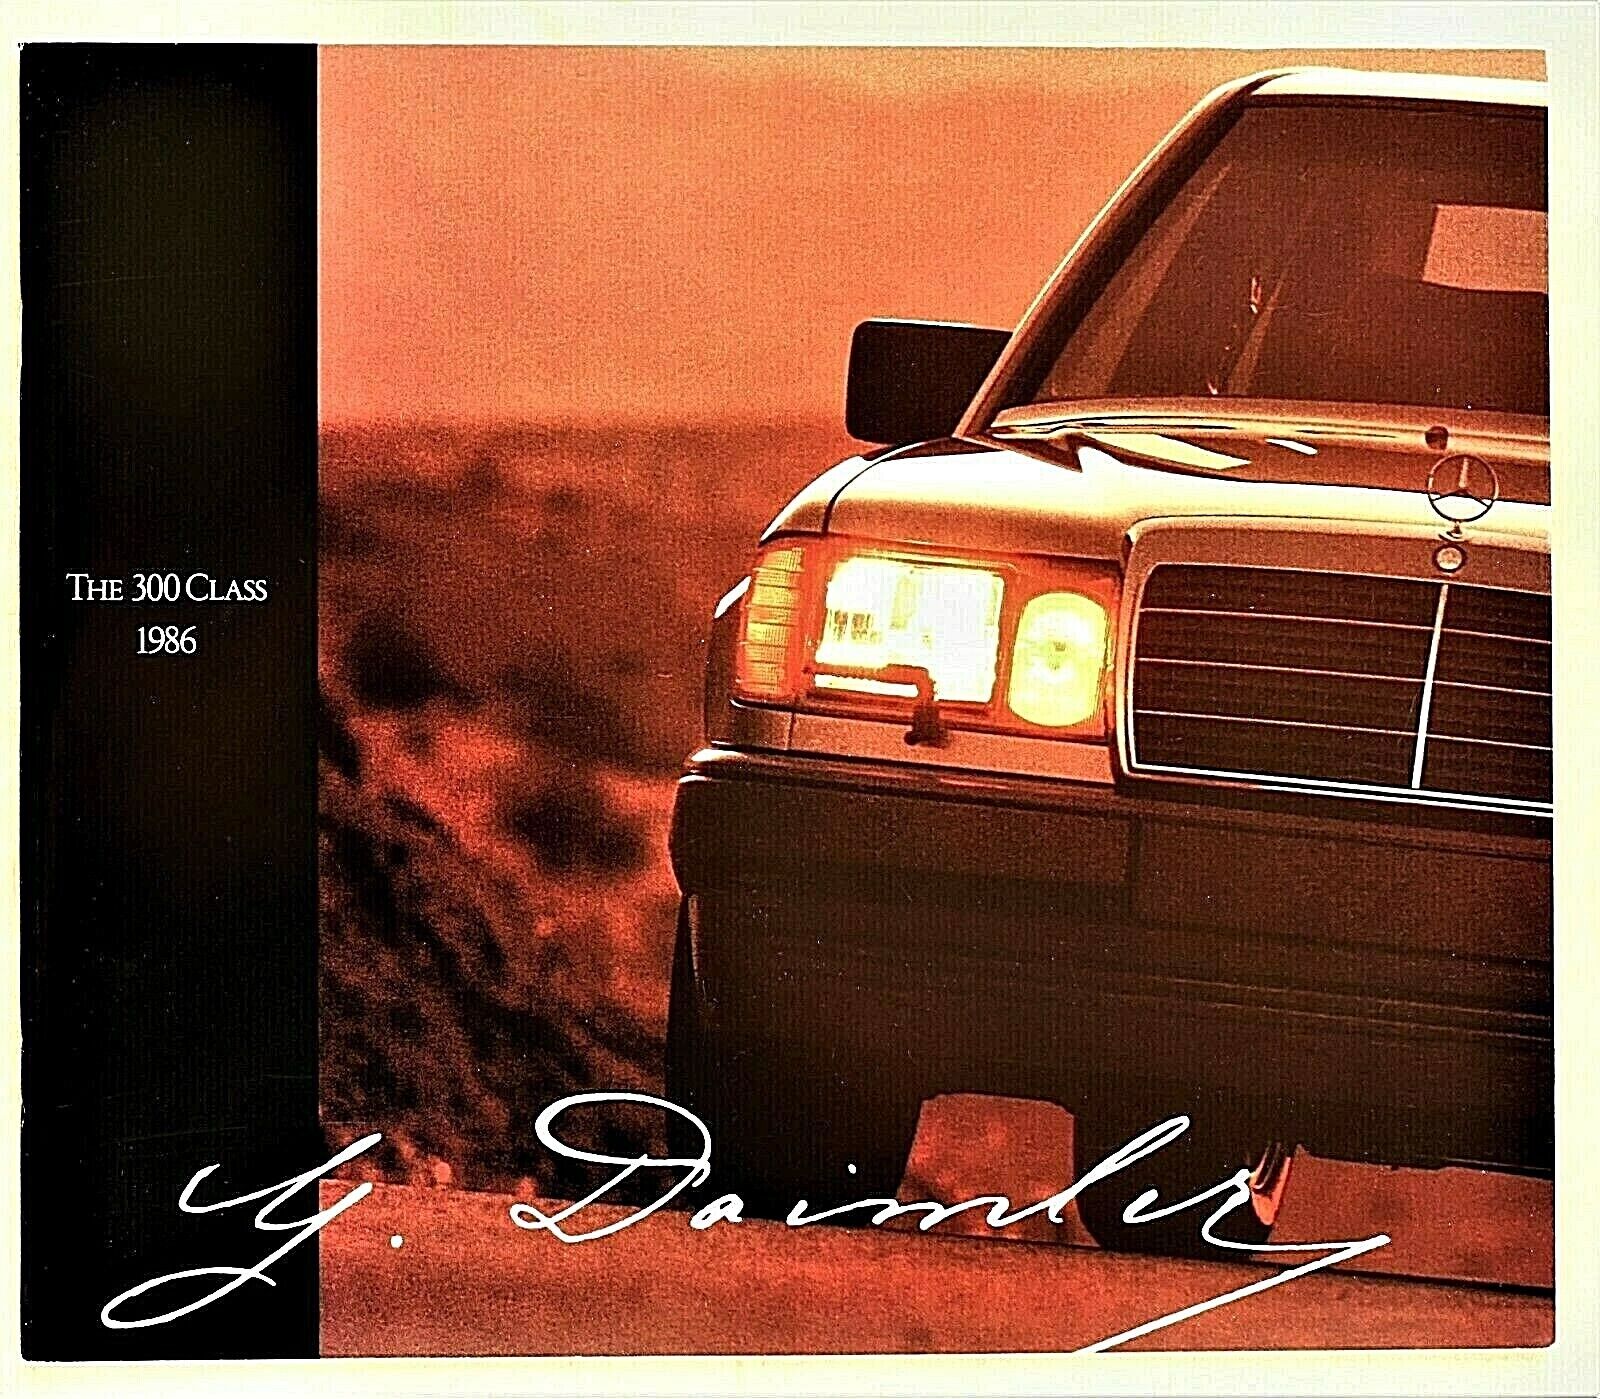 AWESOME 1986 MERCEDES 300 CLASS BROCHURE ~ 10.5